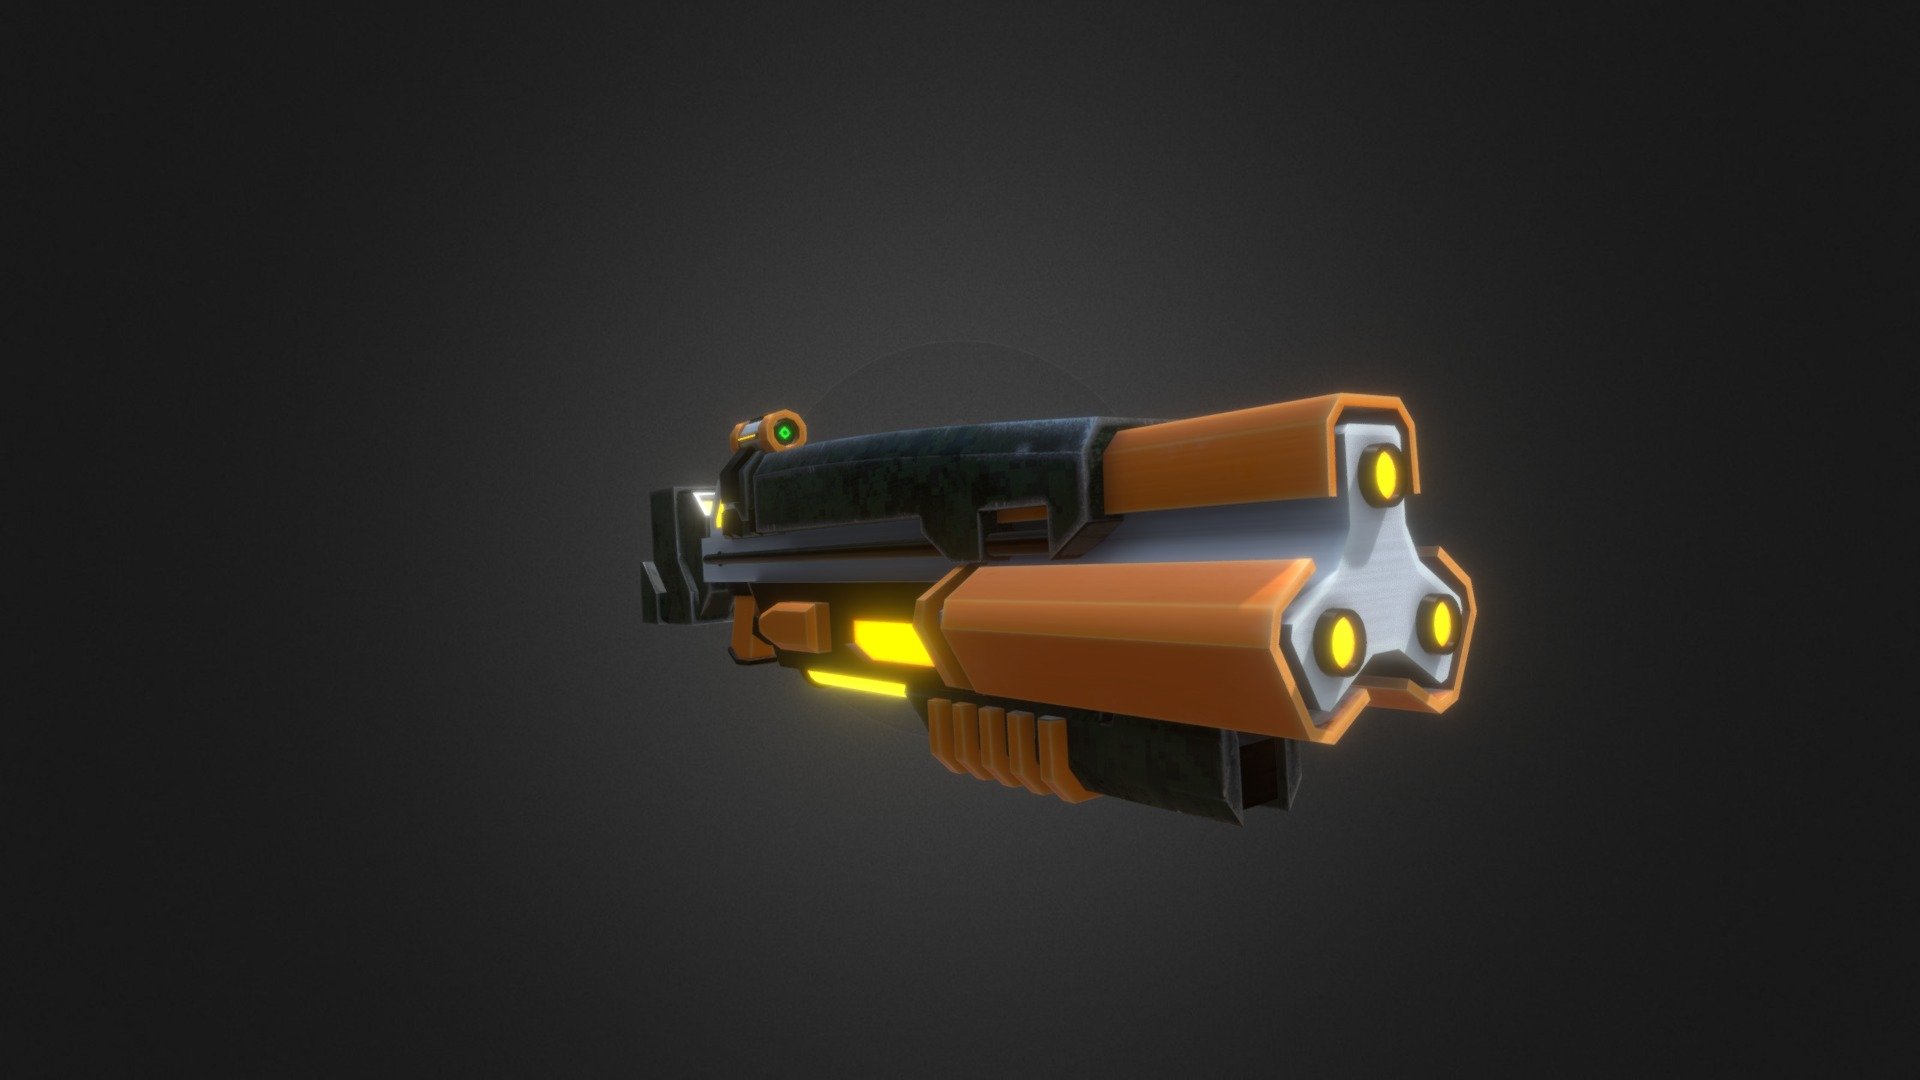 Sci-Fi Rifle design complete with a triple barrel and a green scope sight. Experimented a bit with different materials and glows to achieve the effect you see before you 3d model